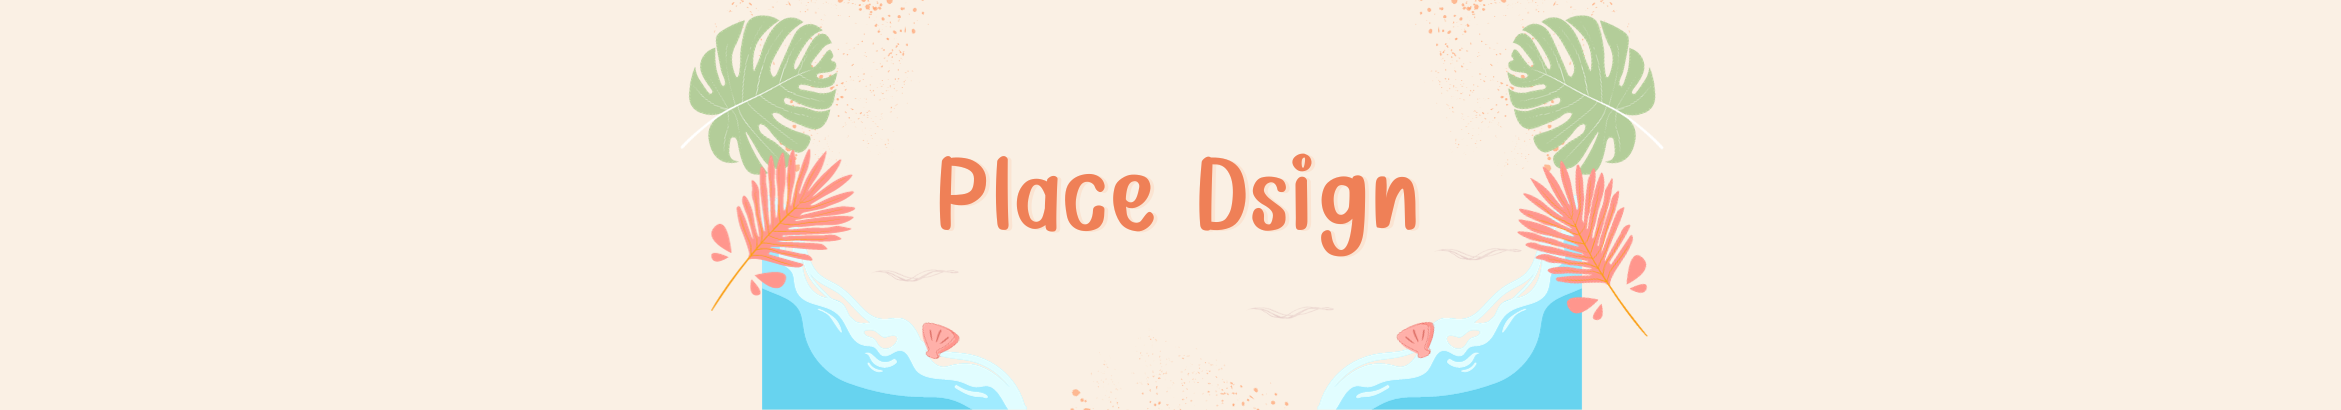 Place Dsign's profile banner